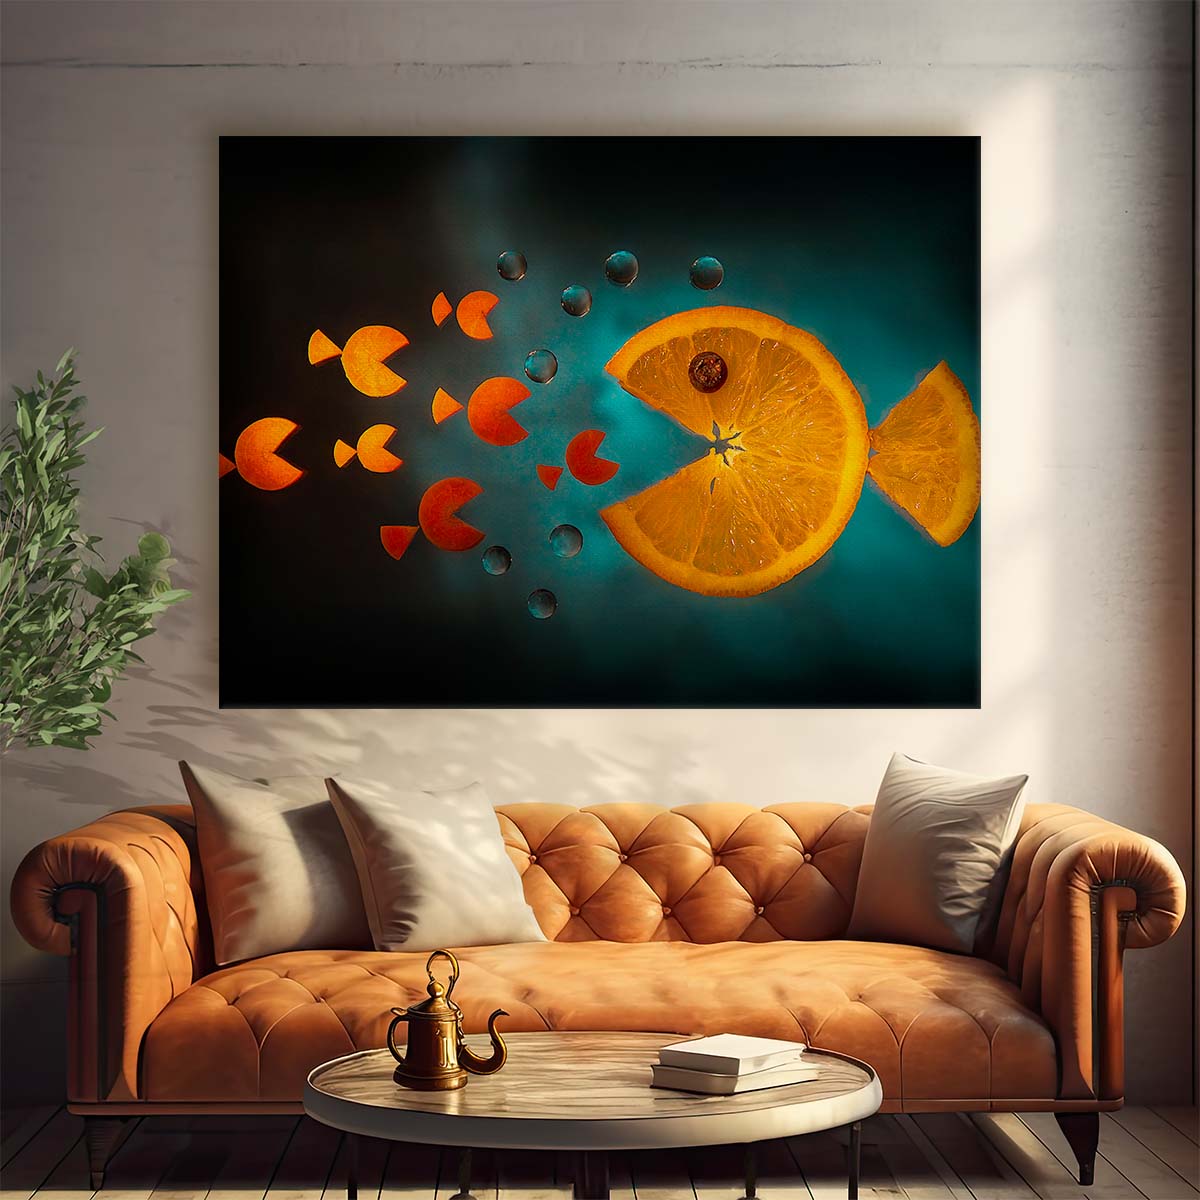 Whimsical Italian Orange Fish & Fruit Still Life Wall Art by Luxuriance Designs. Made in USA.